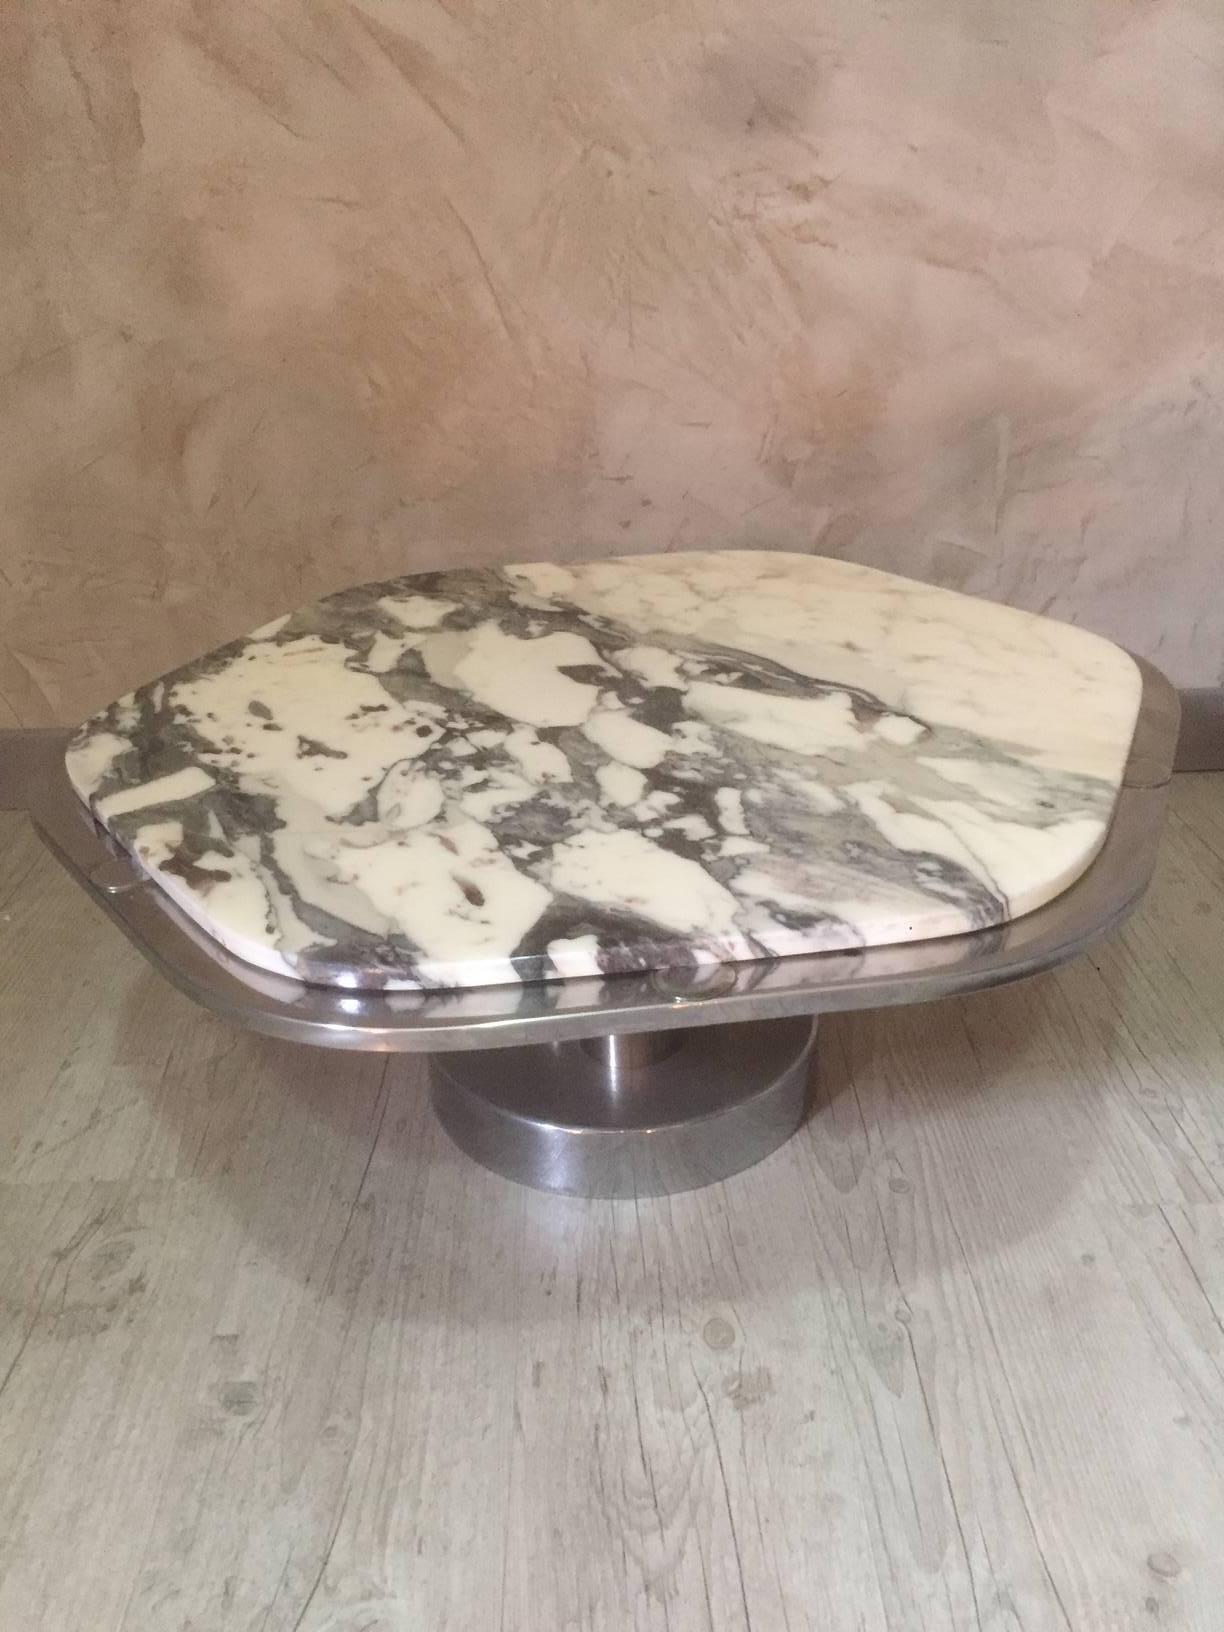 Wonderful Italian hexagonal marble and chromed design coffee table from the 1970s.
